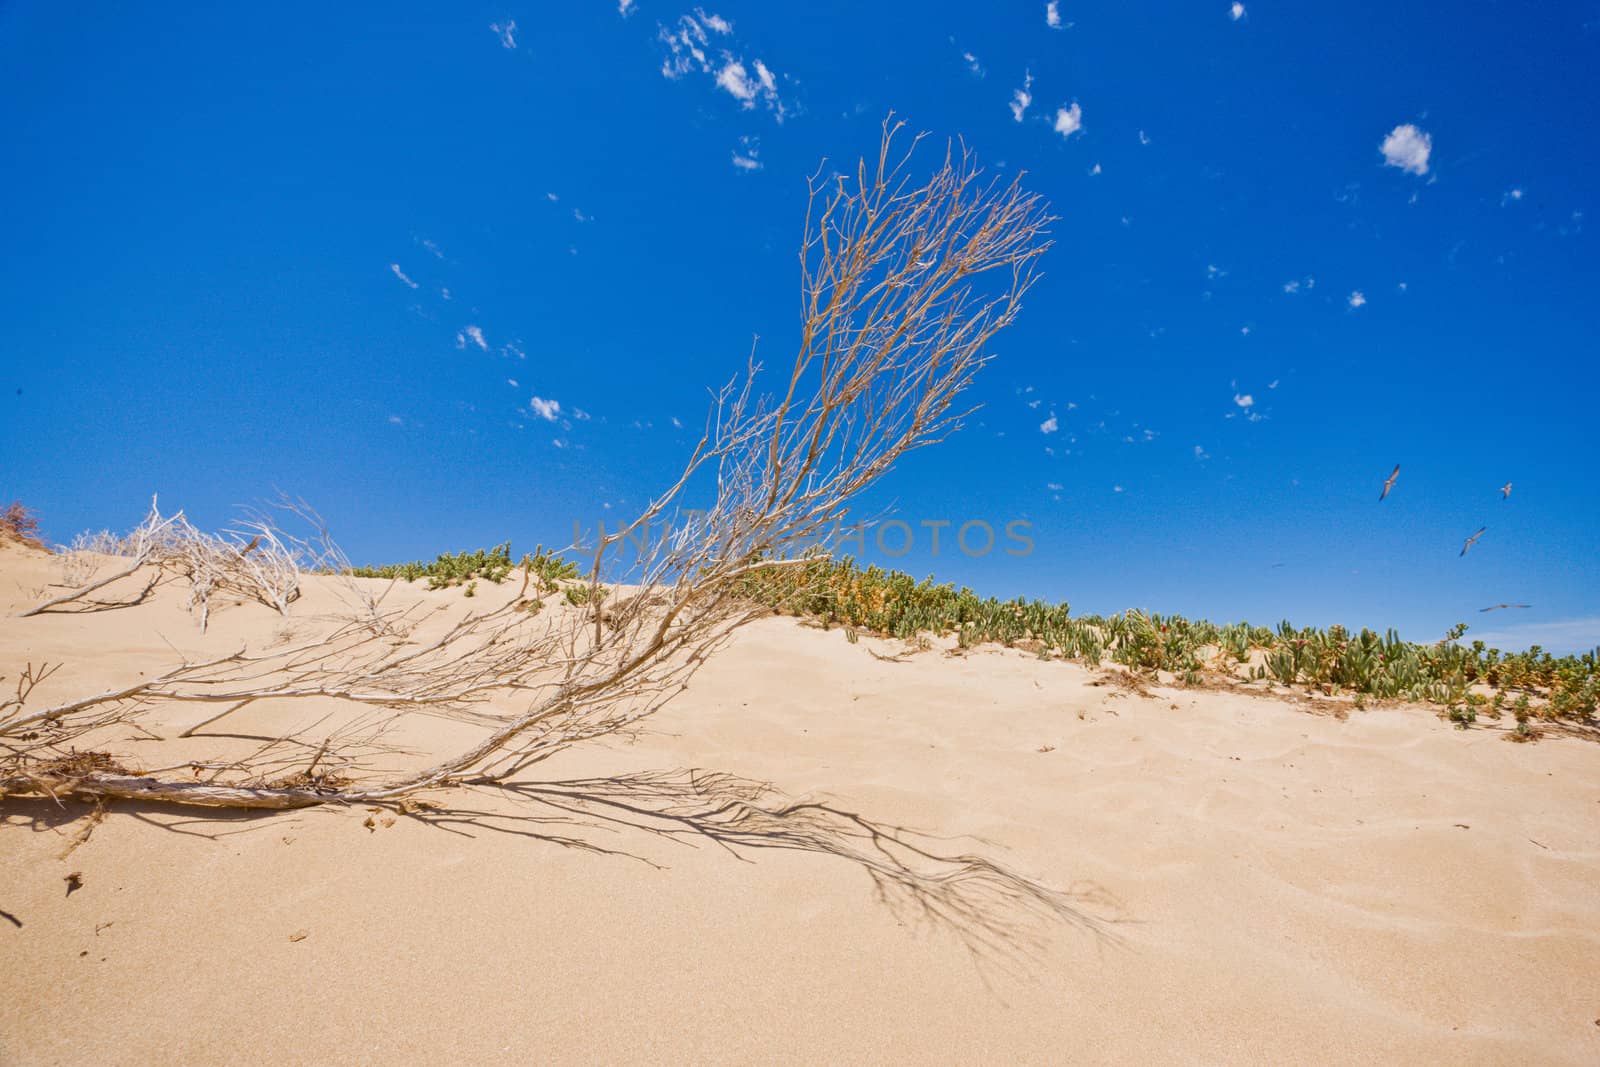 Coastal sand dune at the beach by jrstock